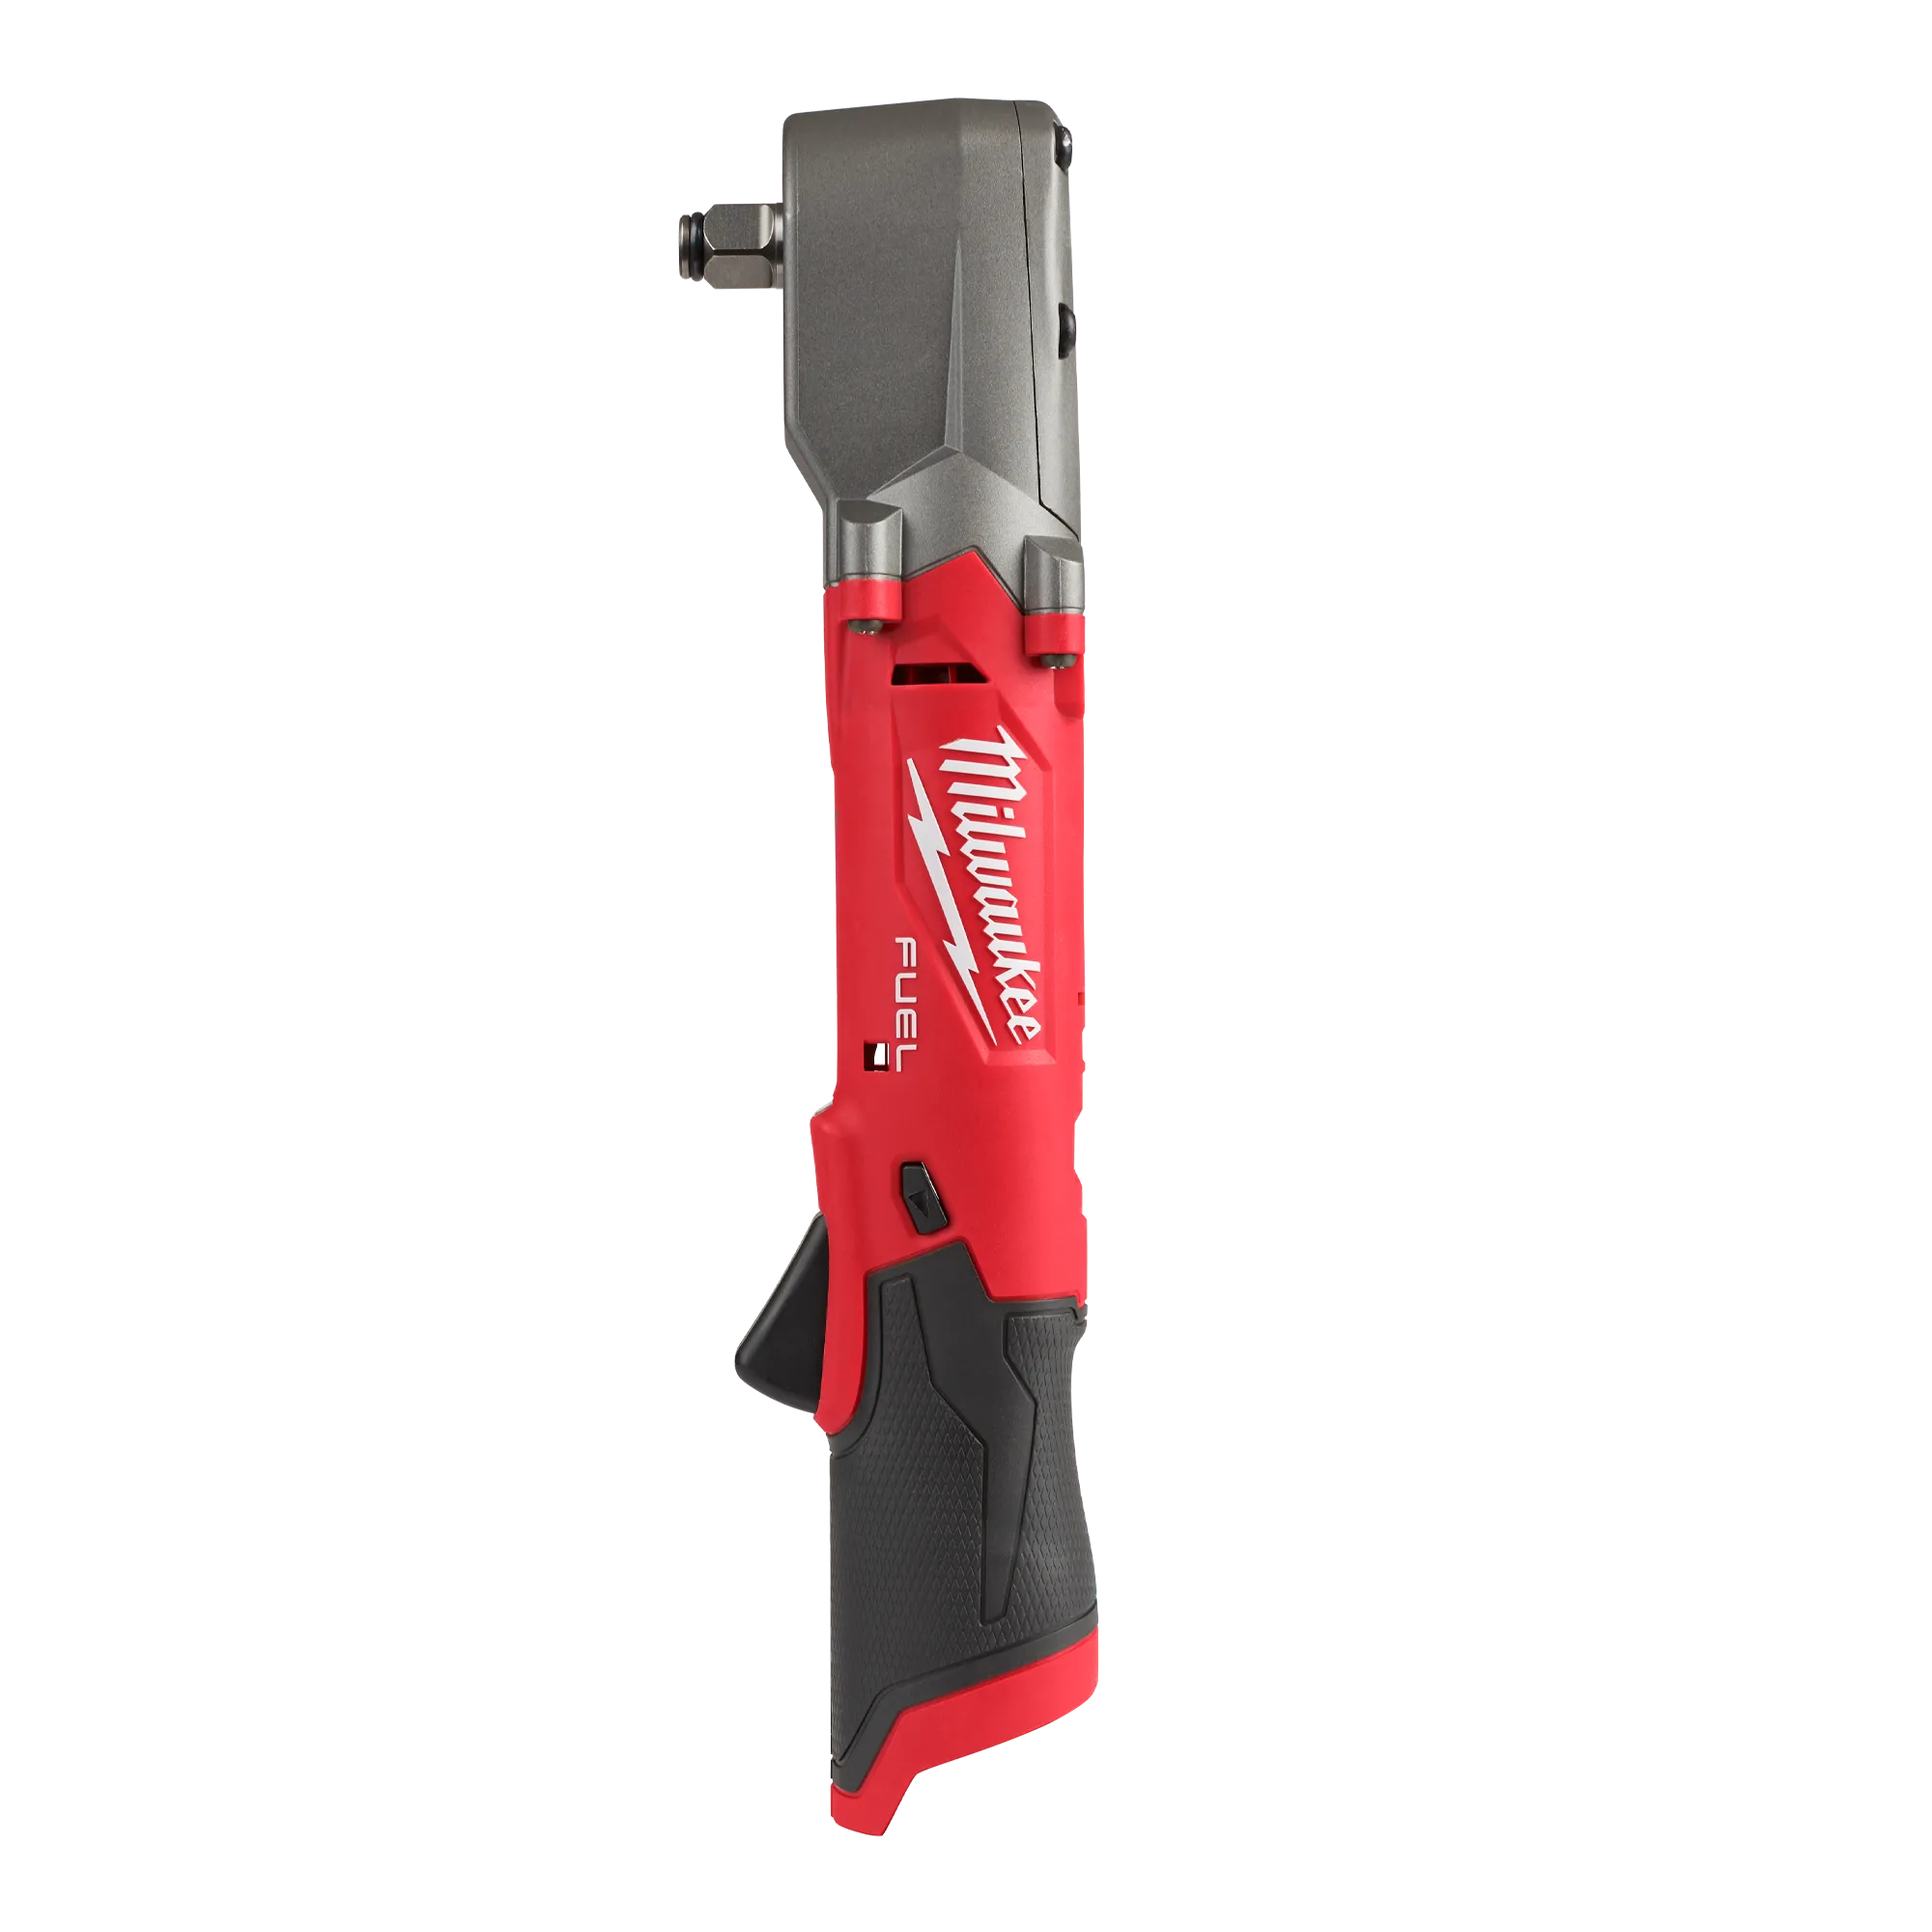 Milwaukee 2565-20 M12 Fuel™ 1/2" Right Angle Impact Wrench TOOL ONLY